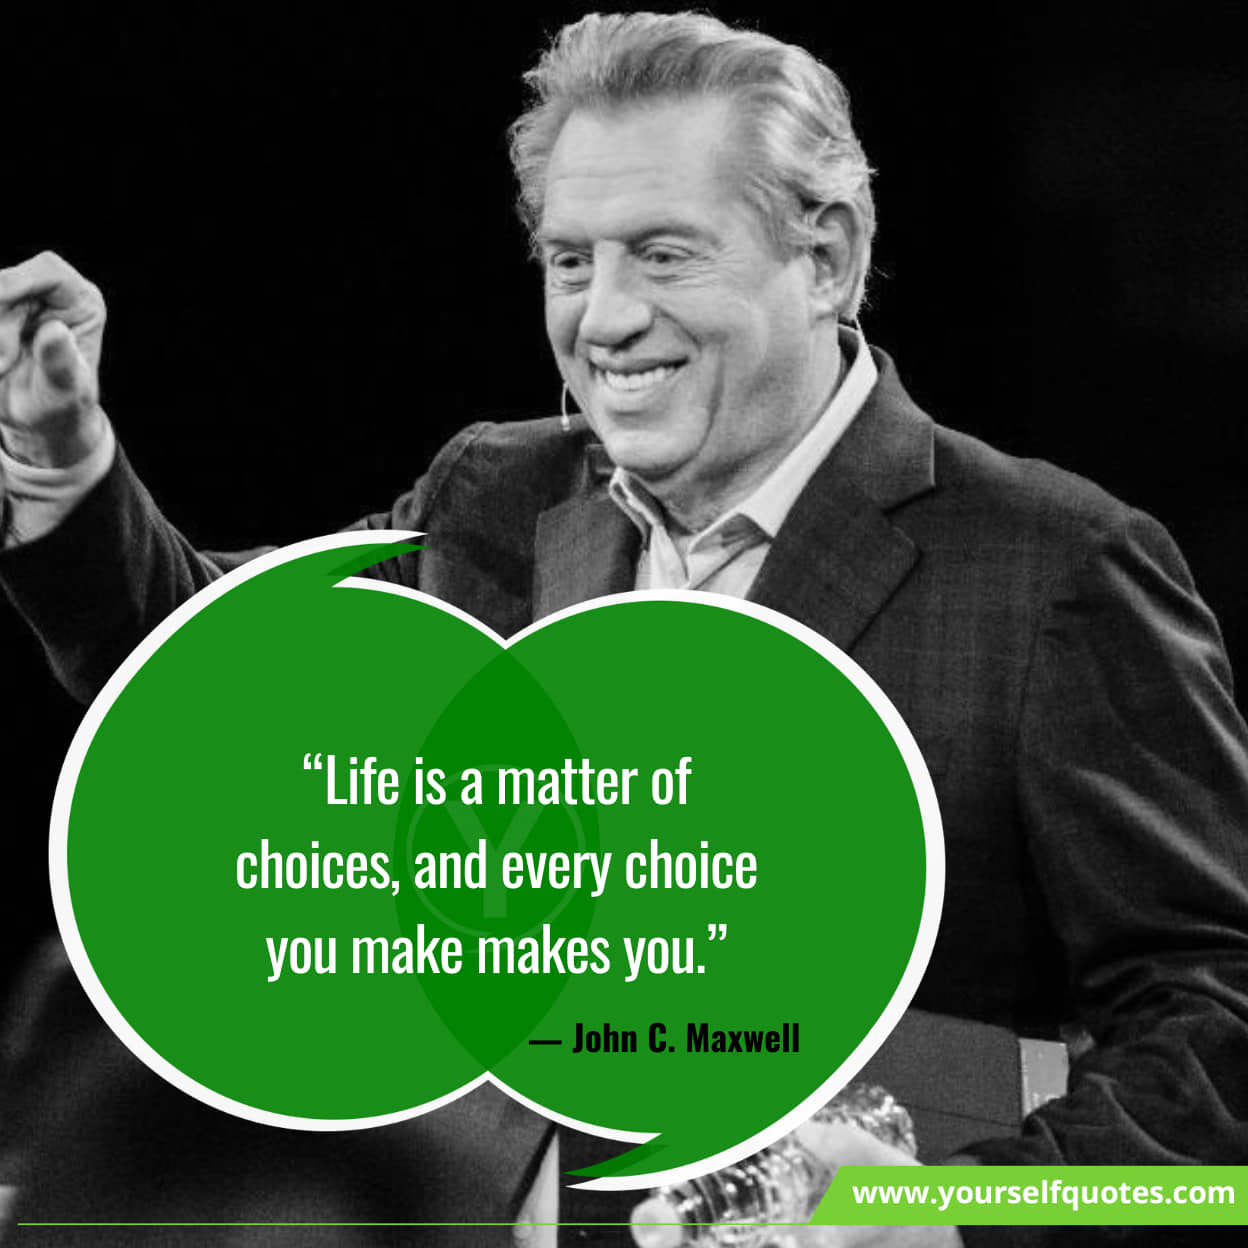 John C. Maxwell quotes on success and achievement